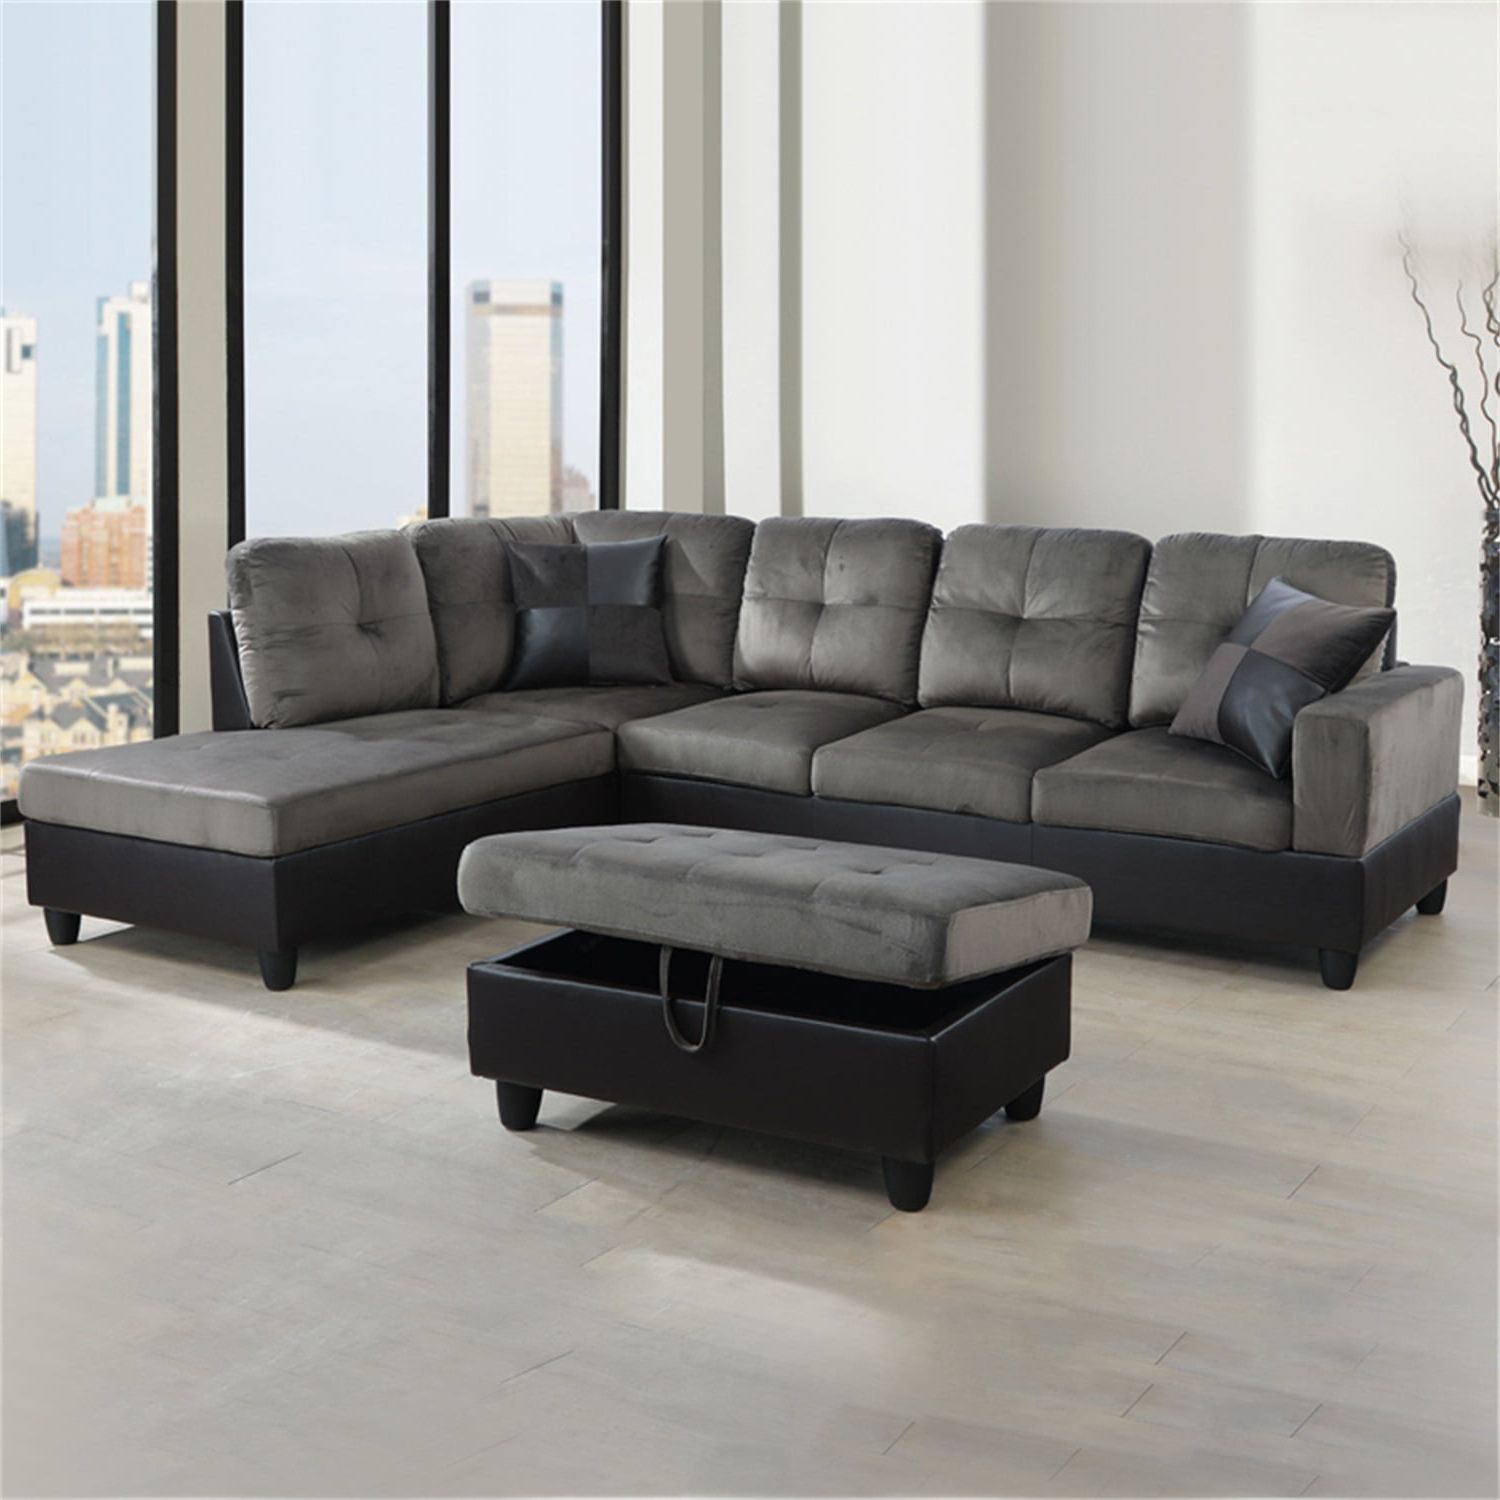 Hommoo Sectional Sofa, Free Combination Sectional Couch, Small L Shaped Sectional  Sofa, Modern Sofa Set For Living Room, Taupe(without Ottoman) – Walmart With Free Combination Sectional Couches (View 3 of 20)